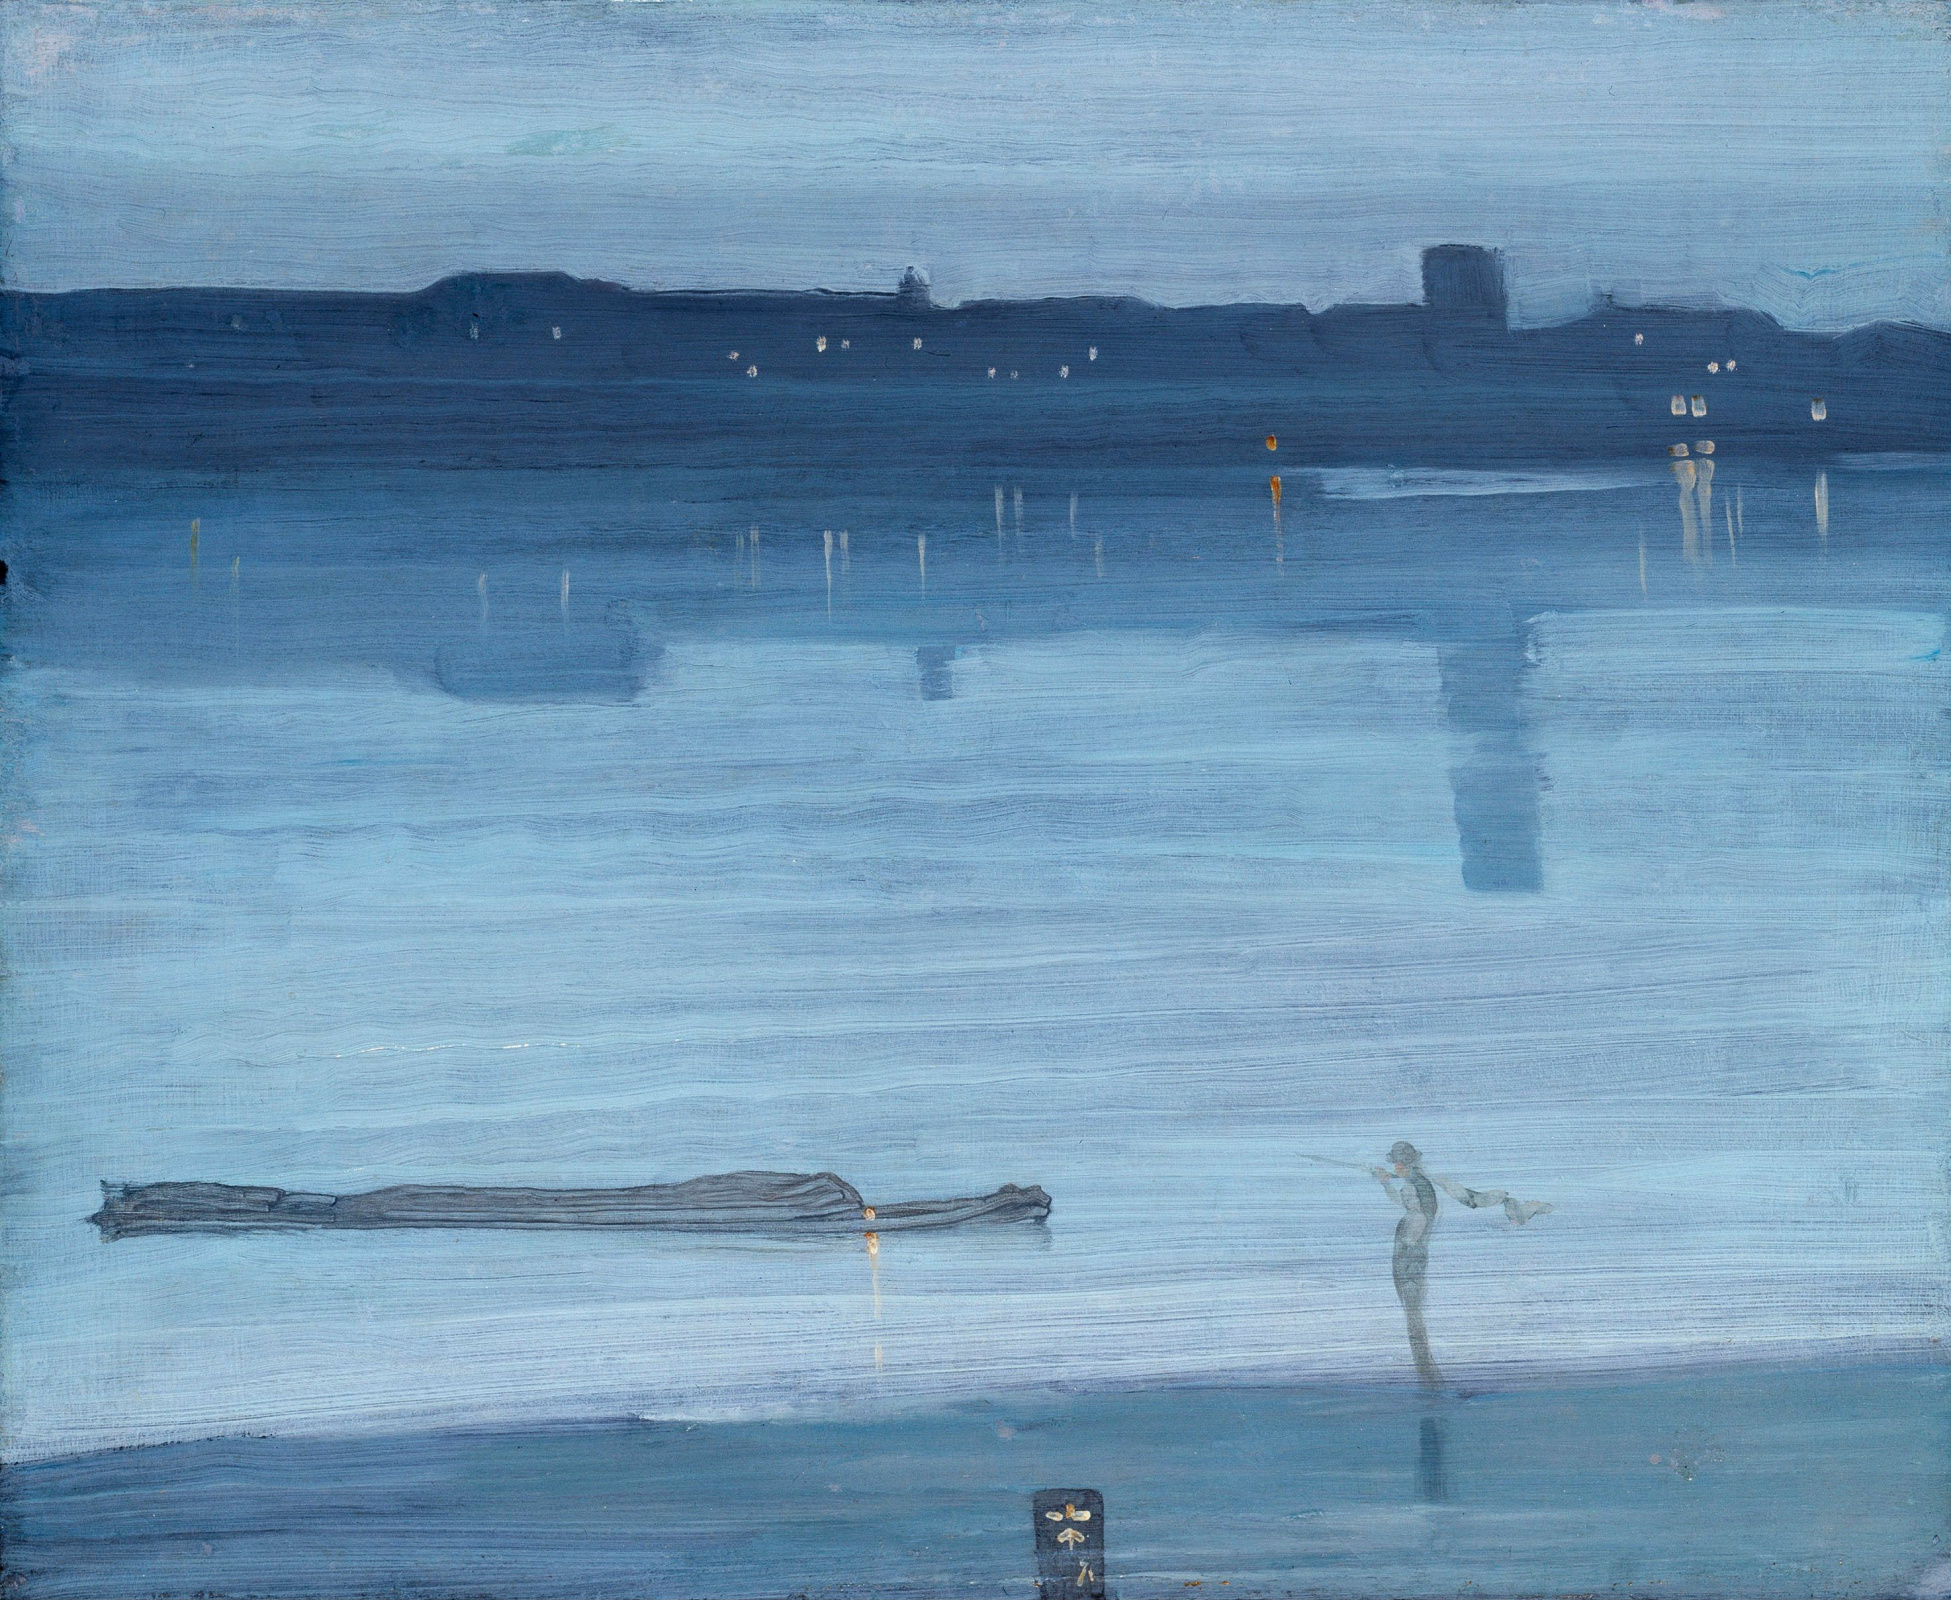 James Abbot McNeill Whistler. Nocturne in blue and silver. Chelsea